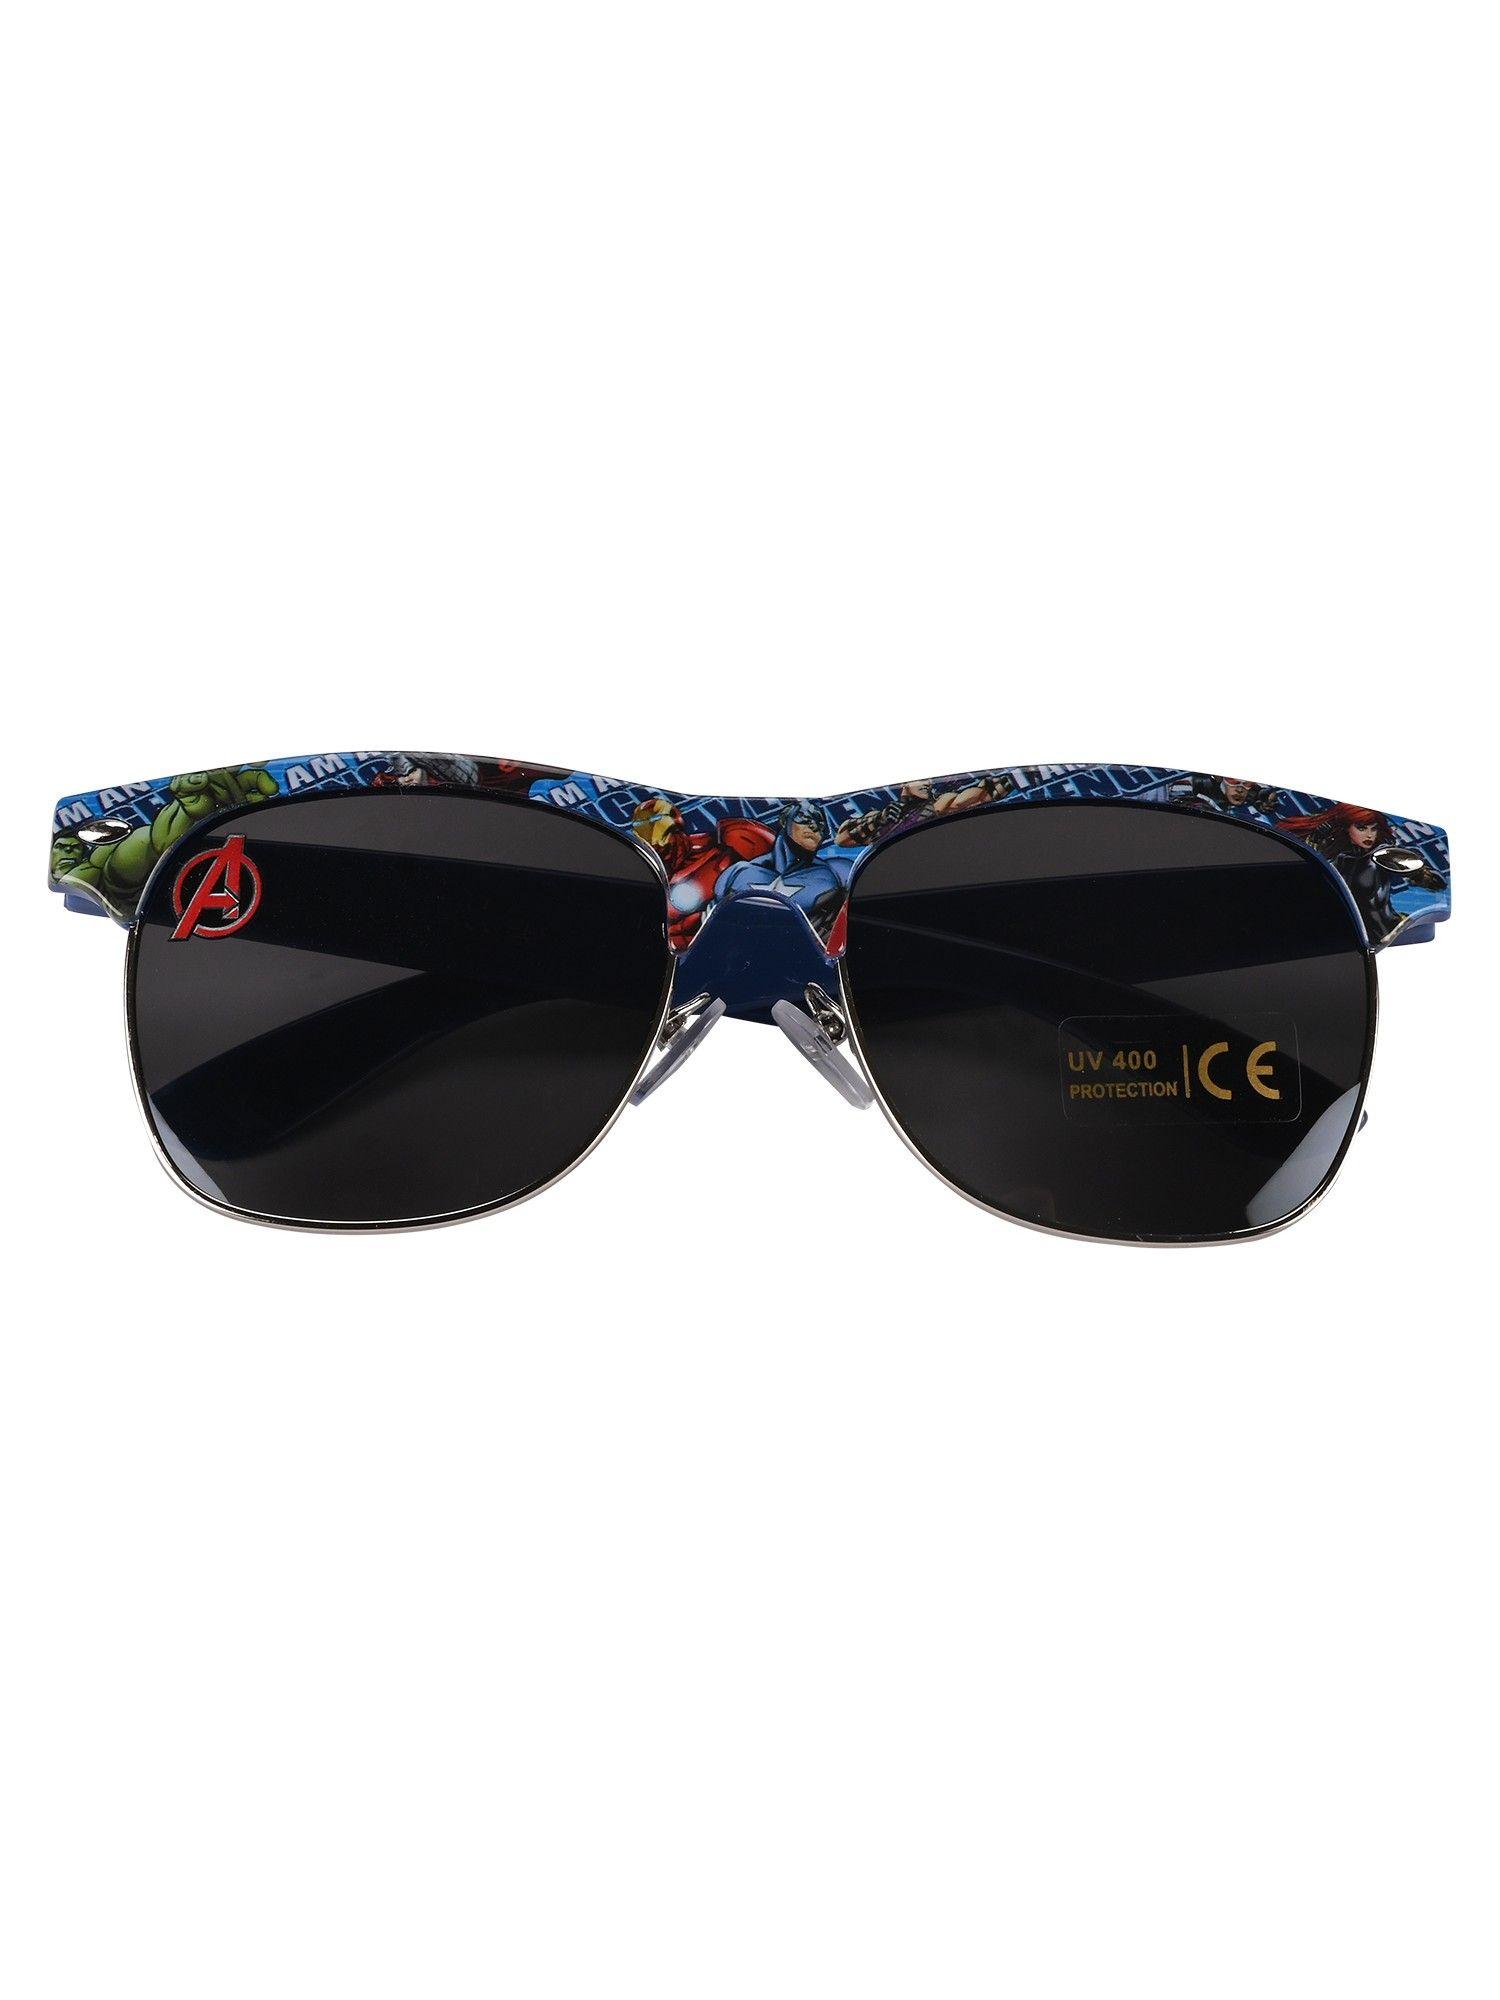 Kids Avengers Sunglasses With Pouch